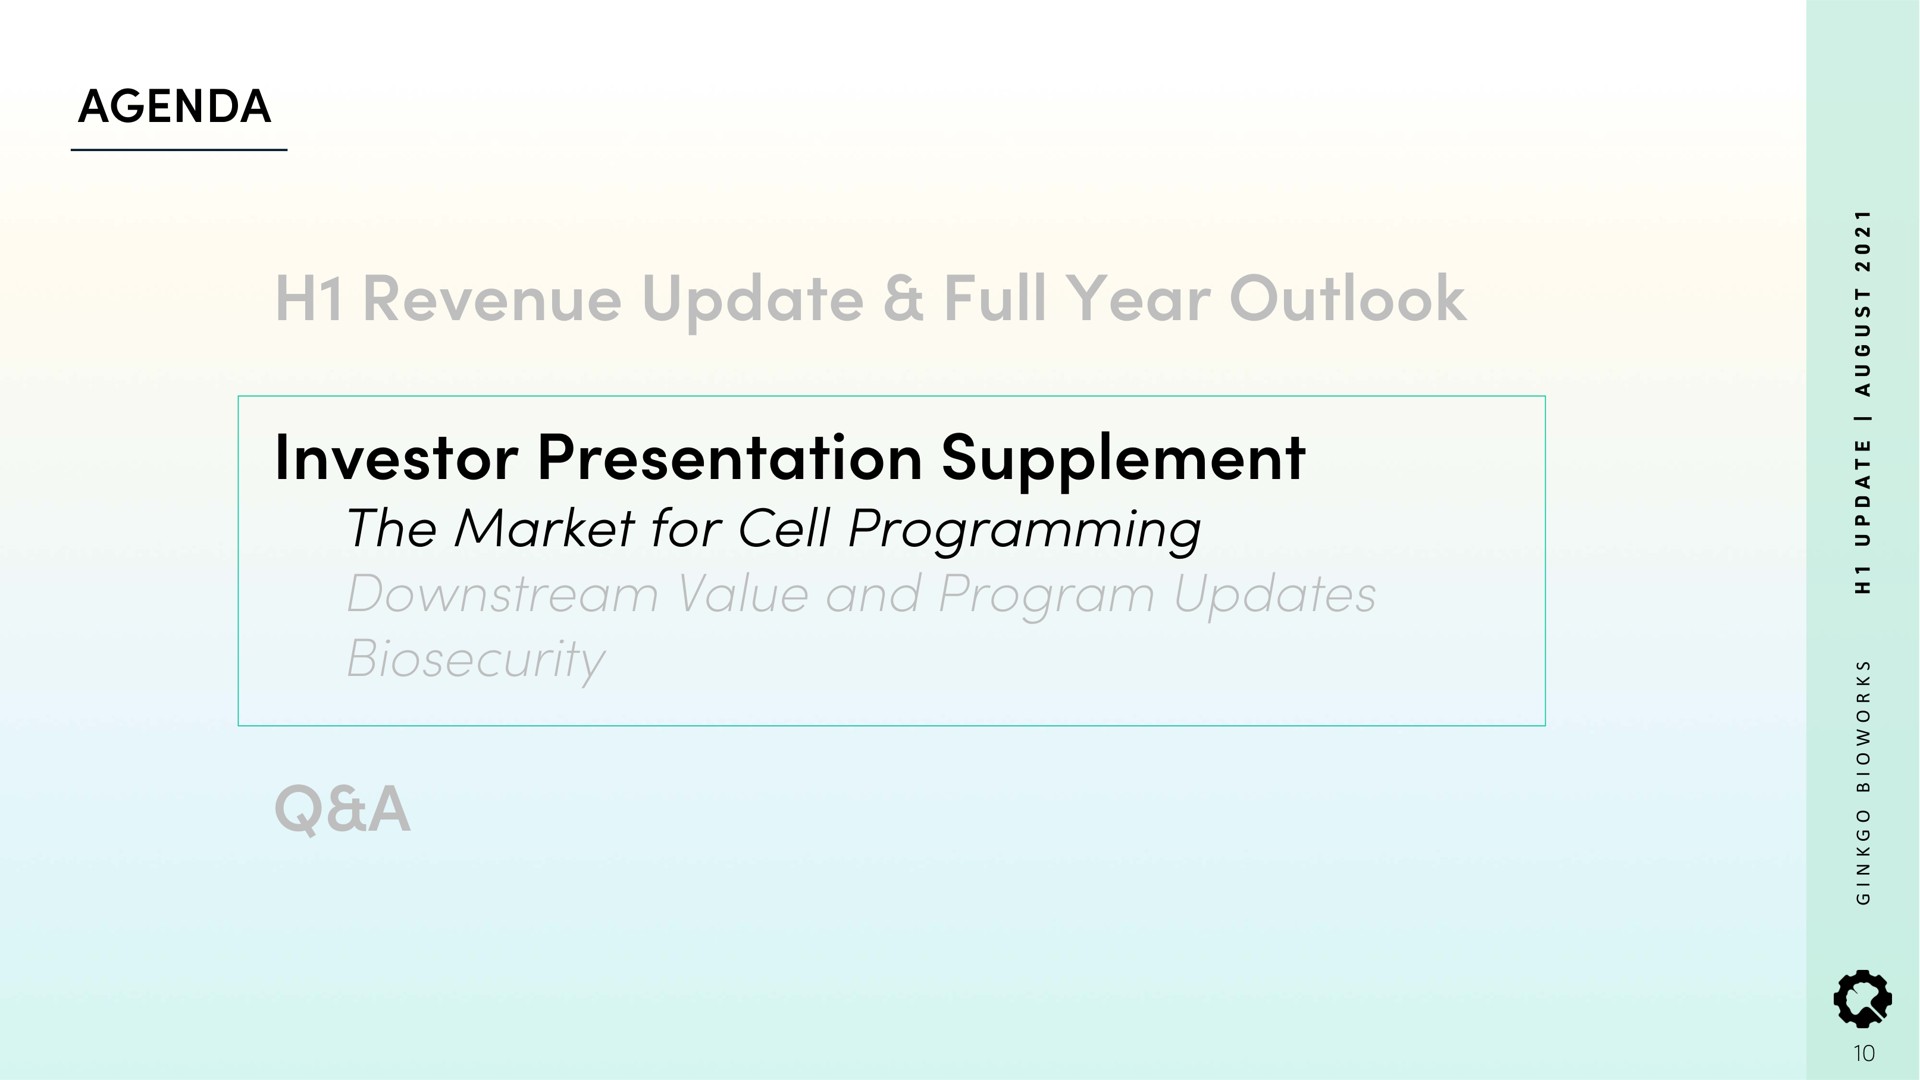 agenda revenue update full year outlook investor presentation supplement the market for cell programming downstream value and program updates a | Ginkgo